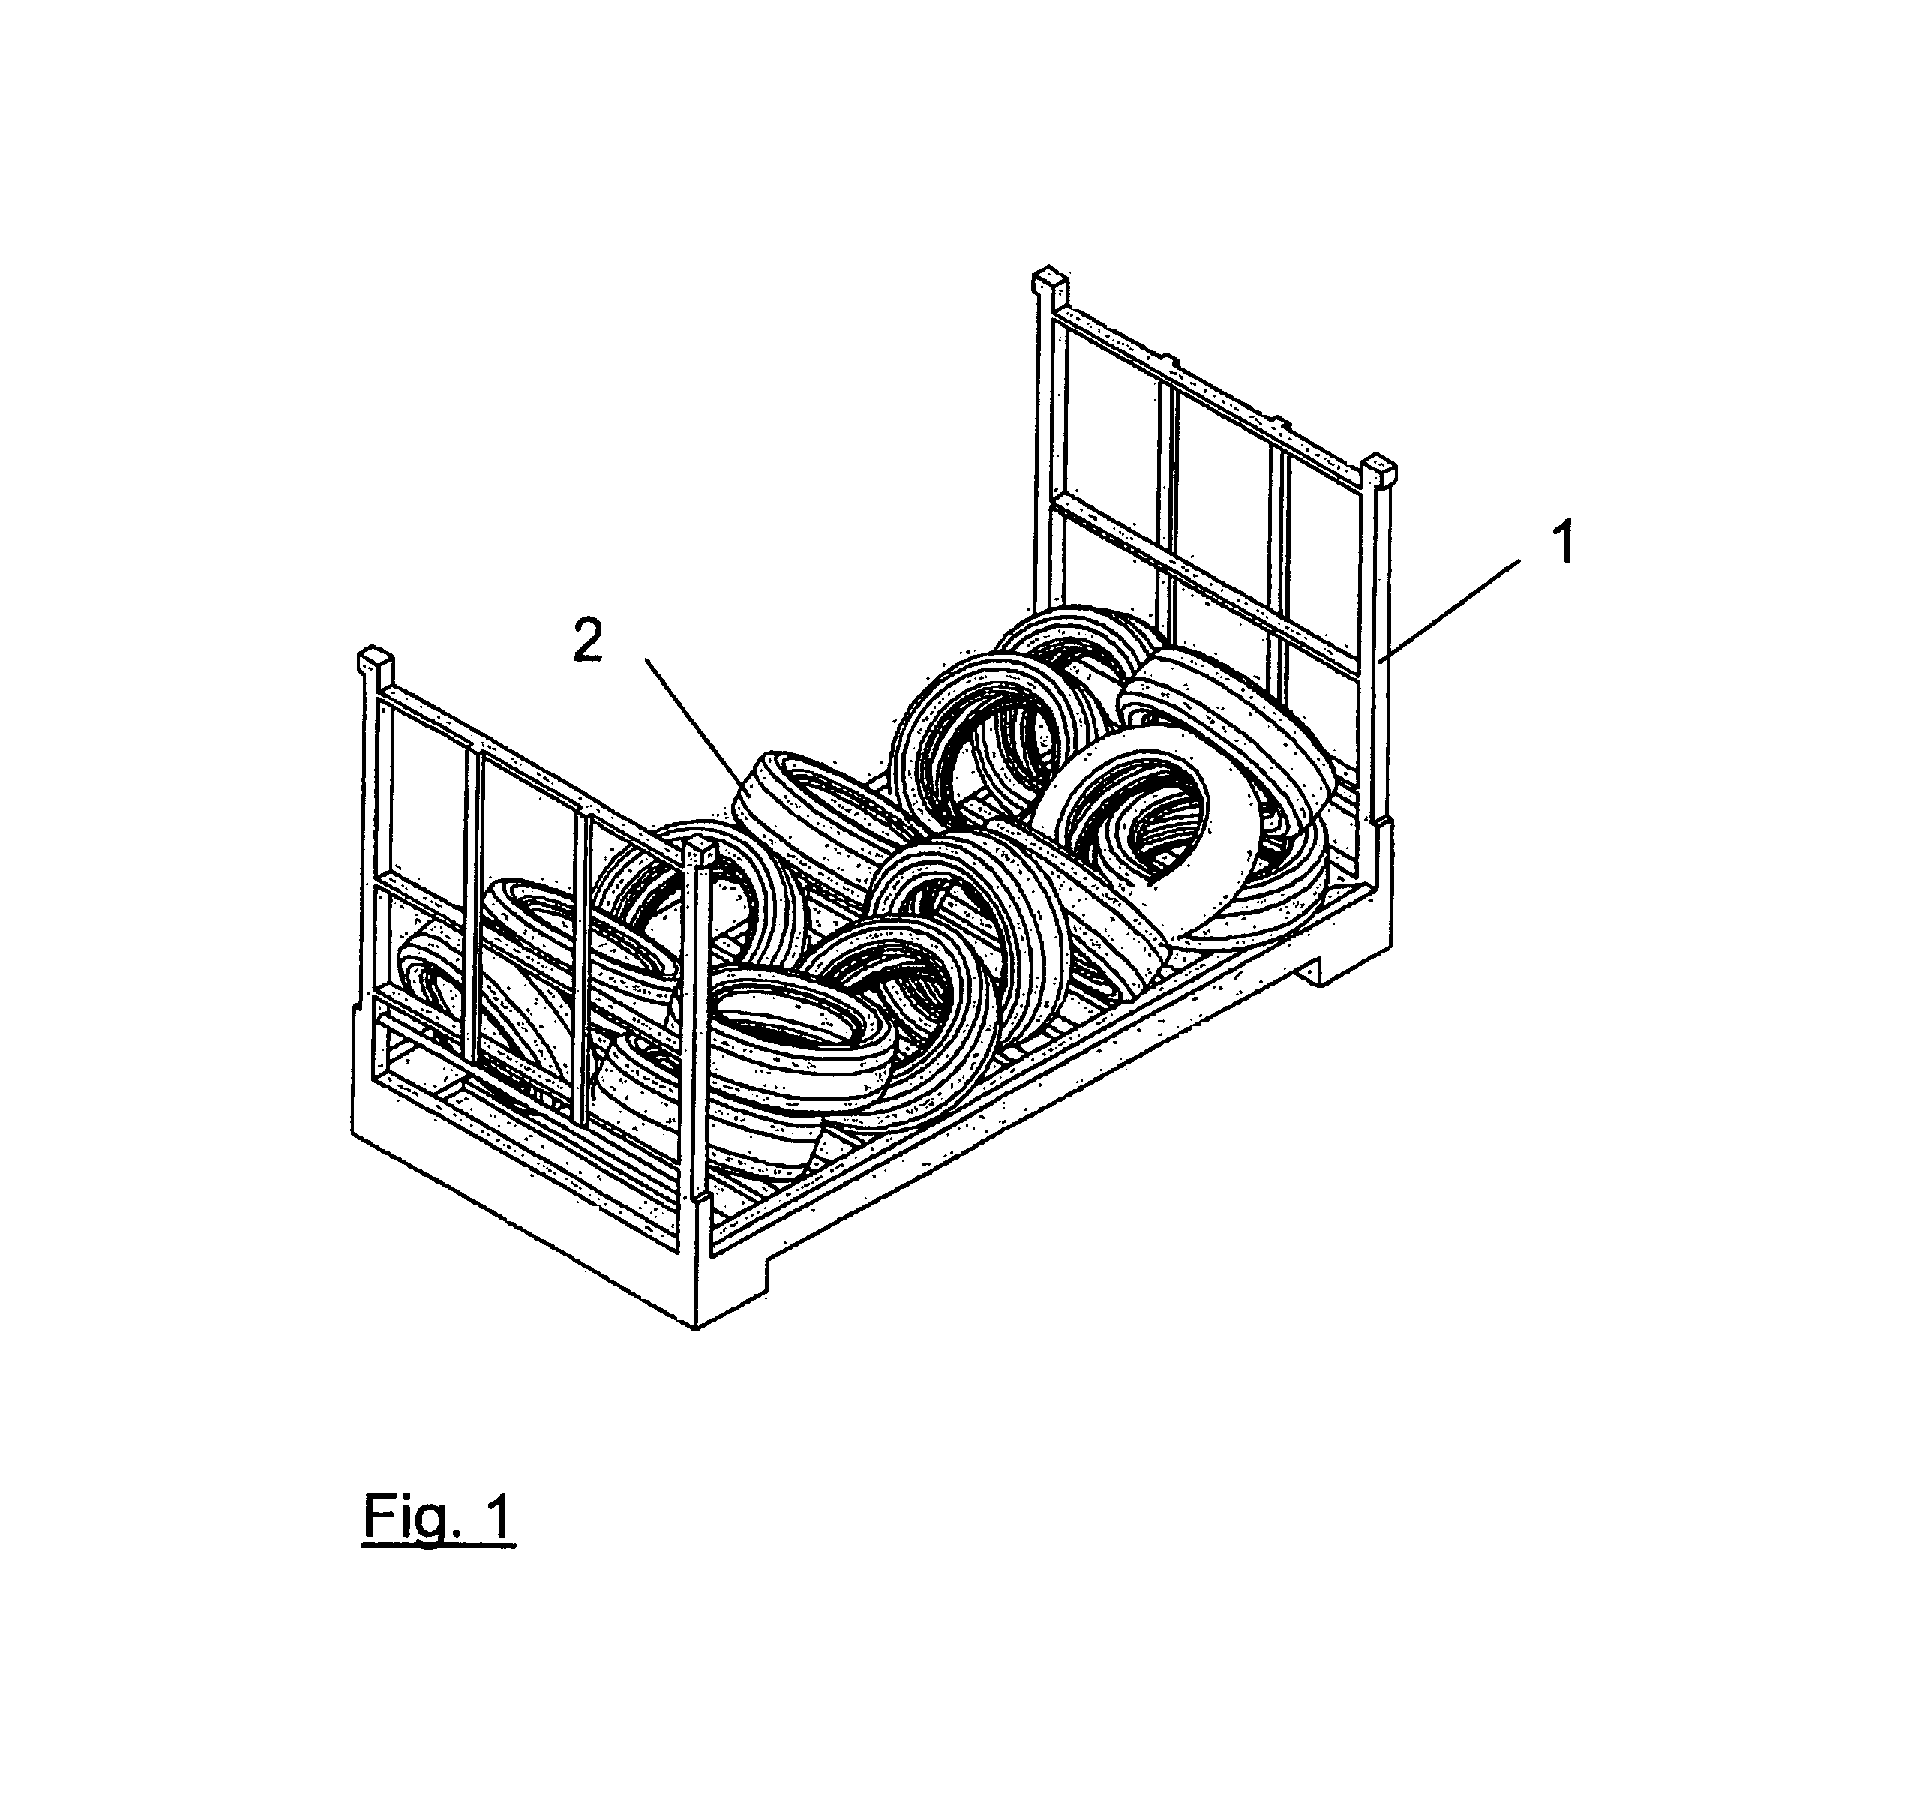 Method and system for depalletizing tires using a robot